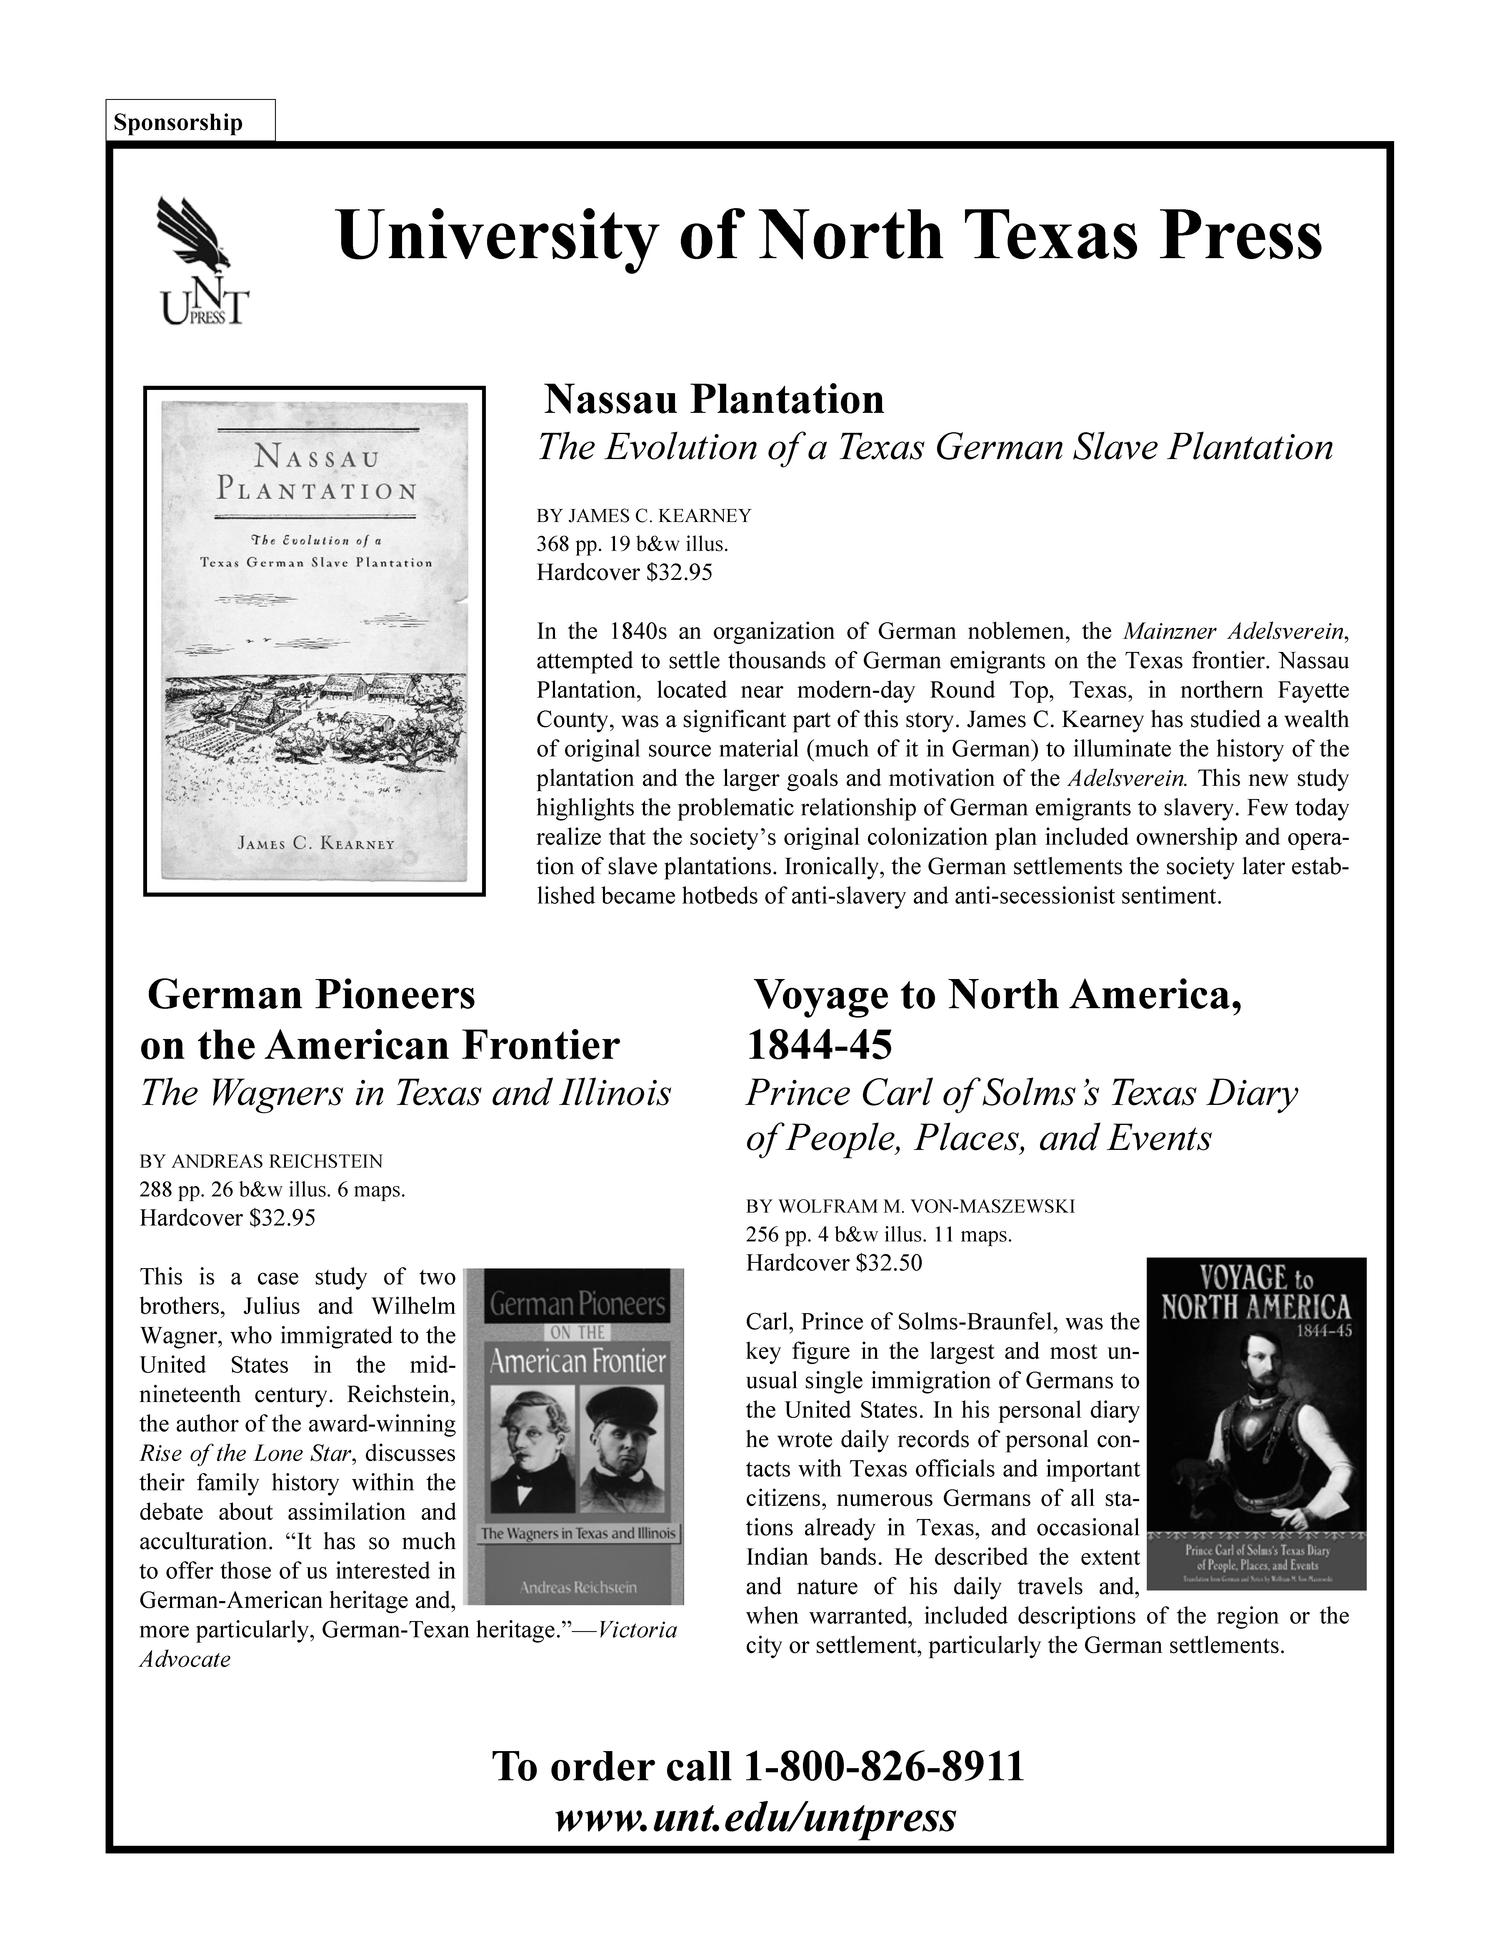 German-Texan Heritage Society, The Journal, Volume 32, Number 3, Fall 2010
                                                
                                                    None
                                                